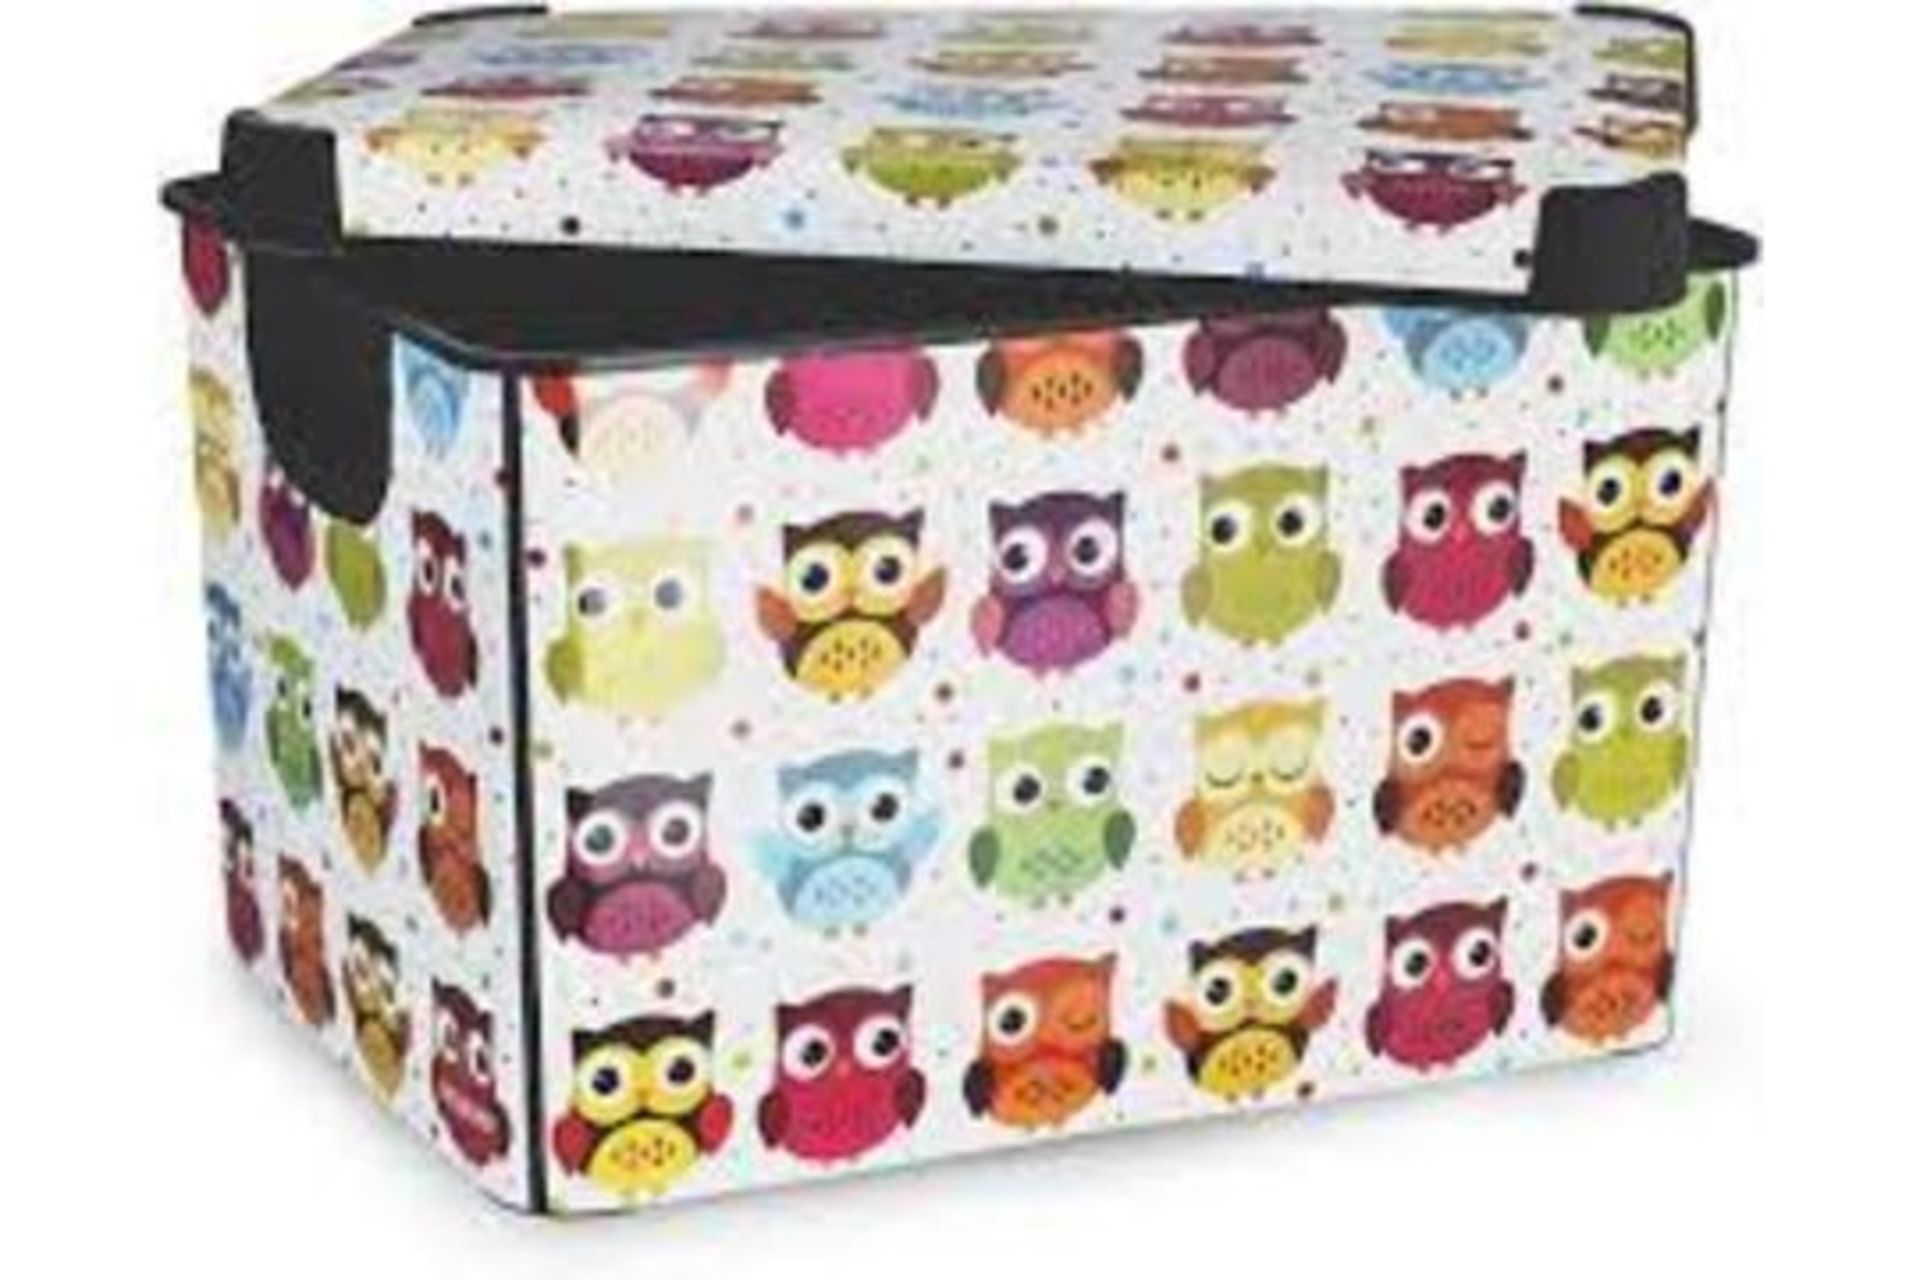 20 x New CURVER STOCKHOLM BOX OWLS LARGE (223798).22L. A contemporary storage solution for your